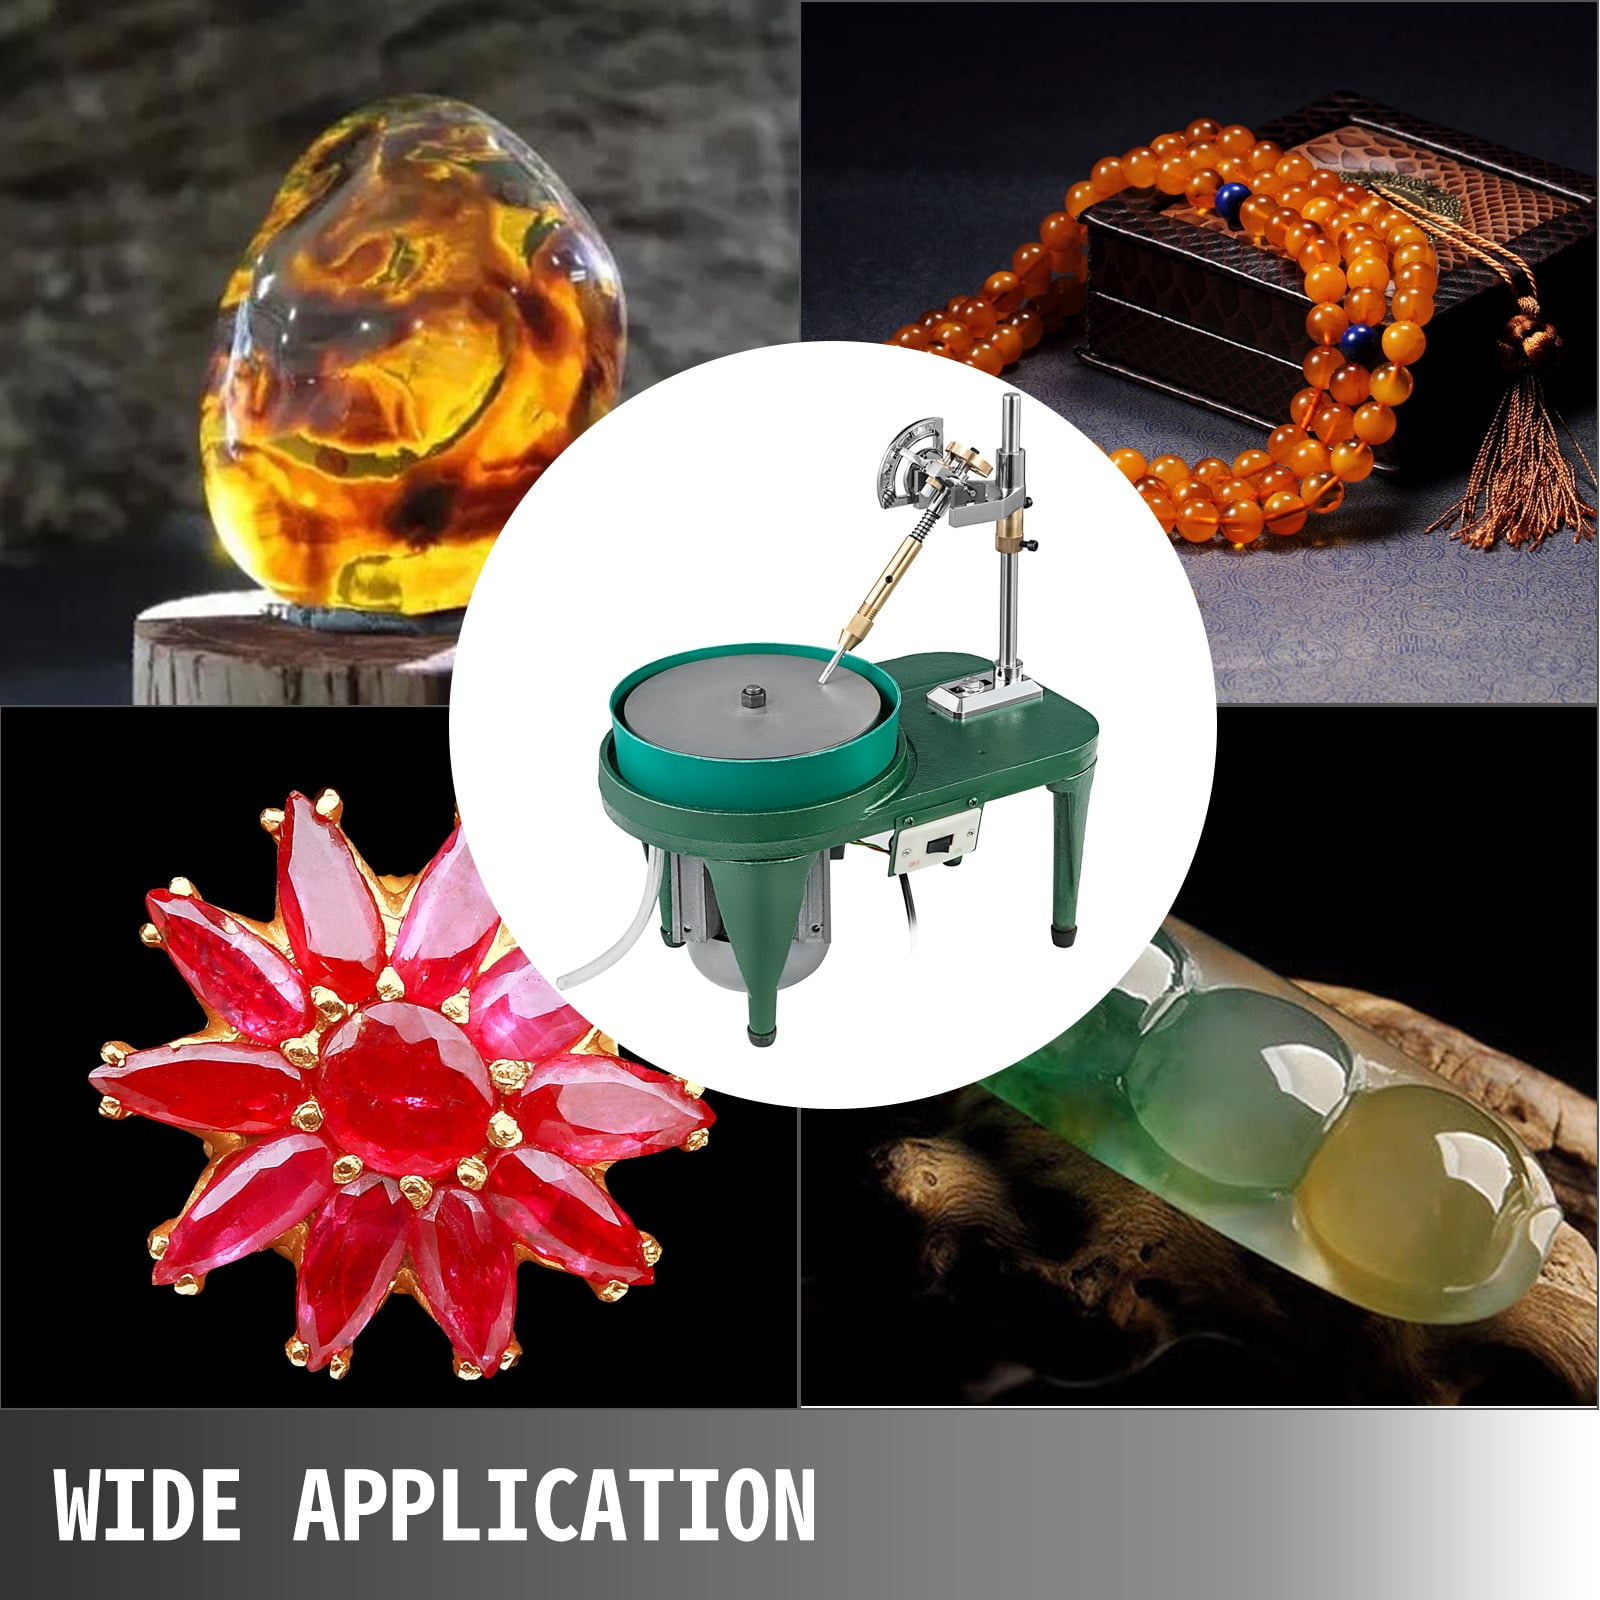 VEVOR Gem Faceting Machine 180W Jade Grinding Polishing Machine 2800RPM Rock Polisher Jewel Angle Polisher with Faceted Manipulator and 1 Bag of Triangle Abrasive for Jewelry Polisher 110V 